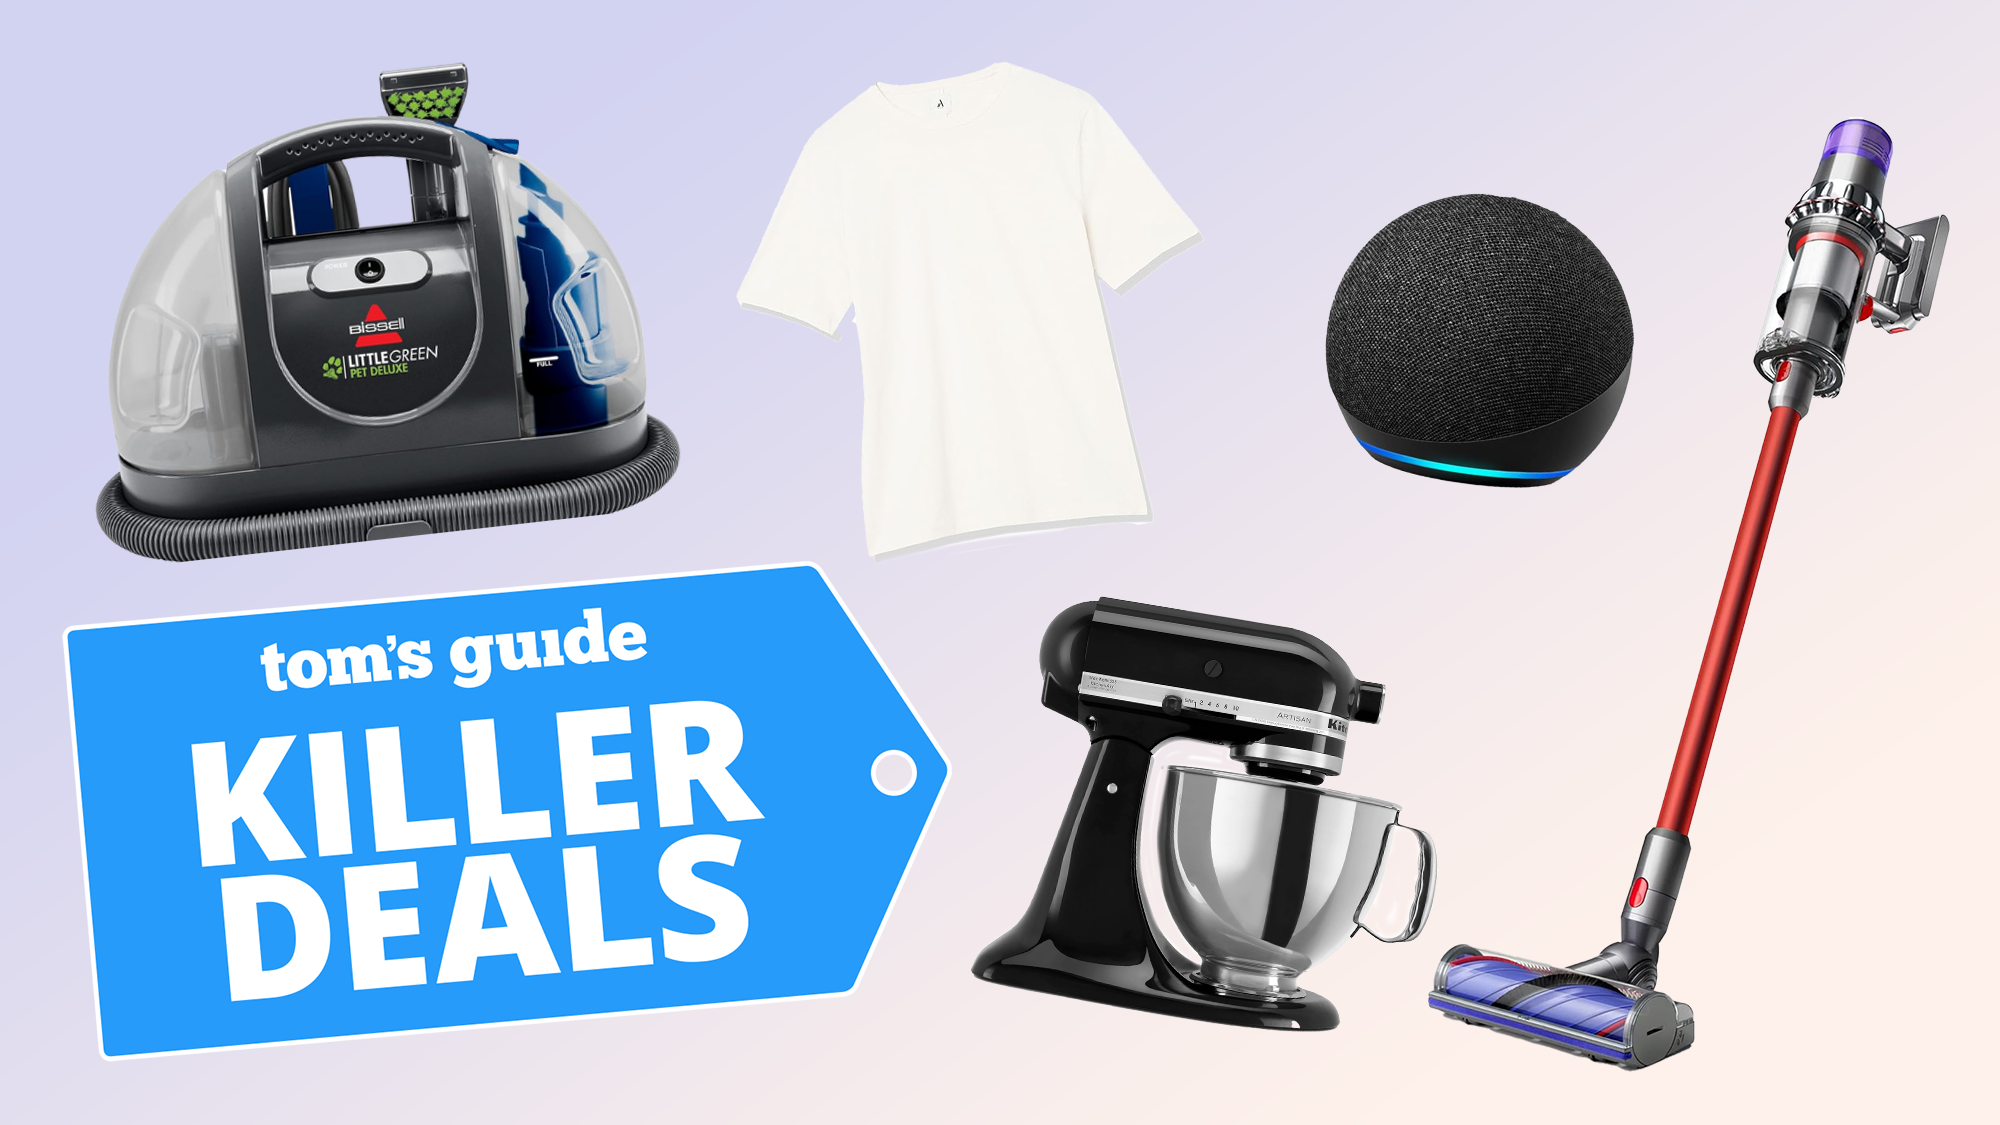 Massive Amazon weekend sale returns — from apparel to tech starting at $6